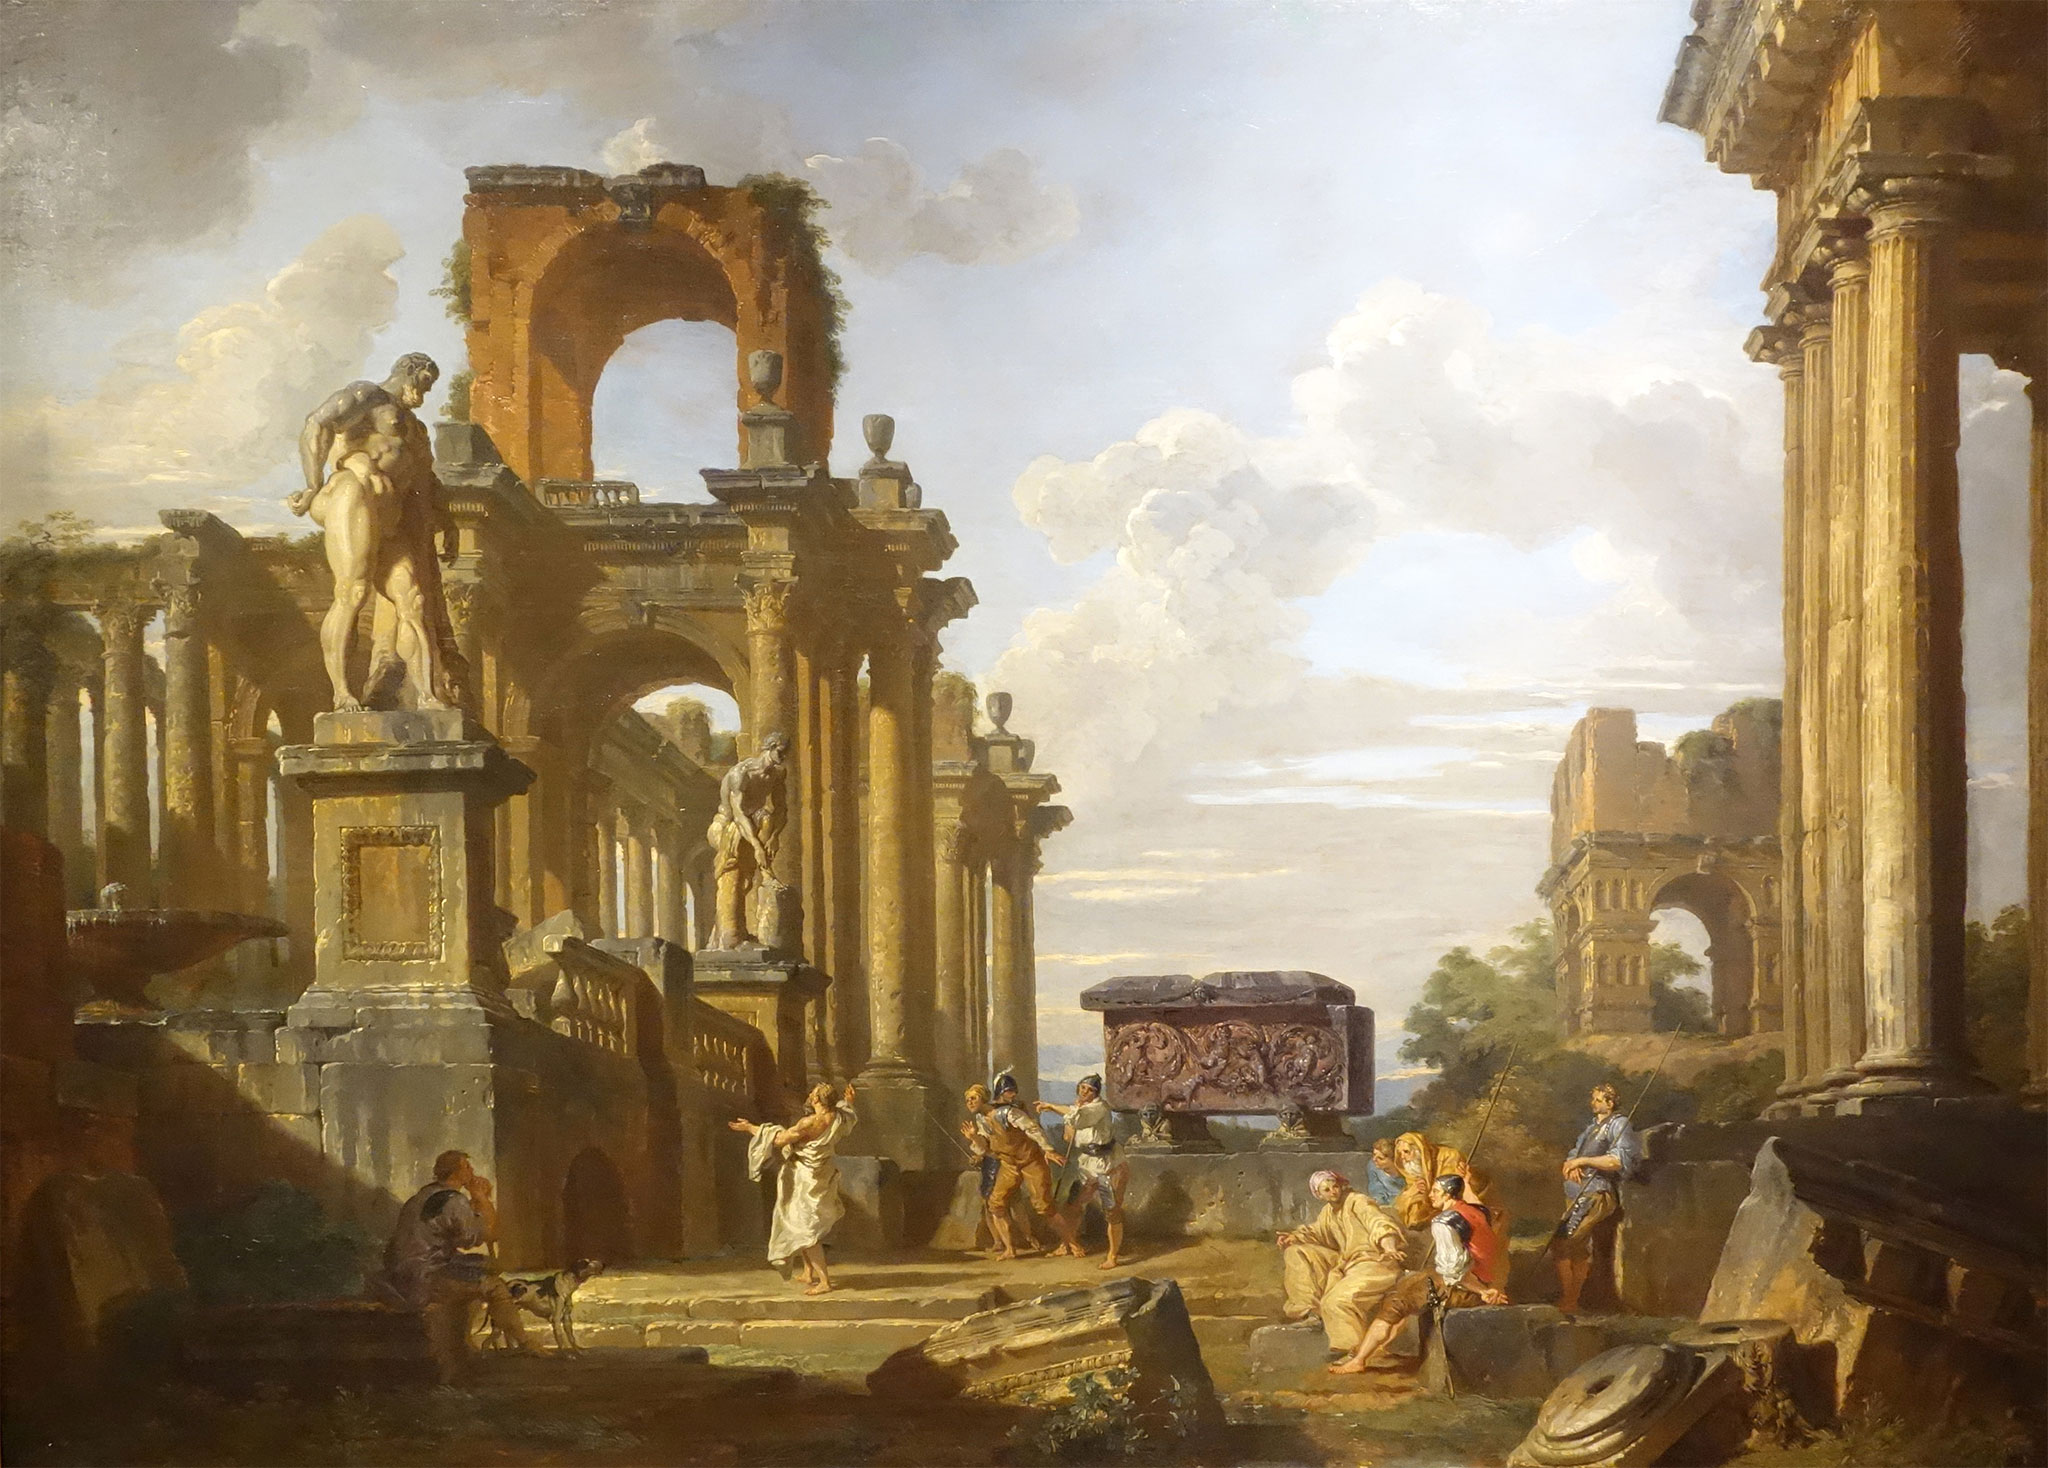 Painting of the Ruins of the Roman Forum